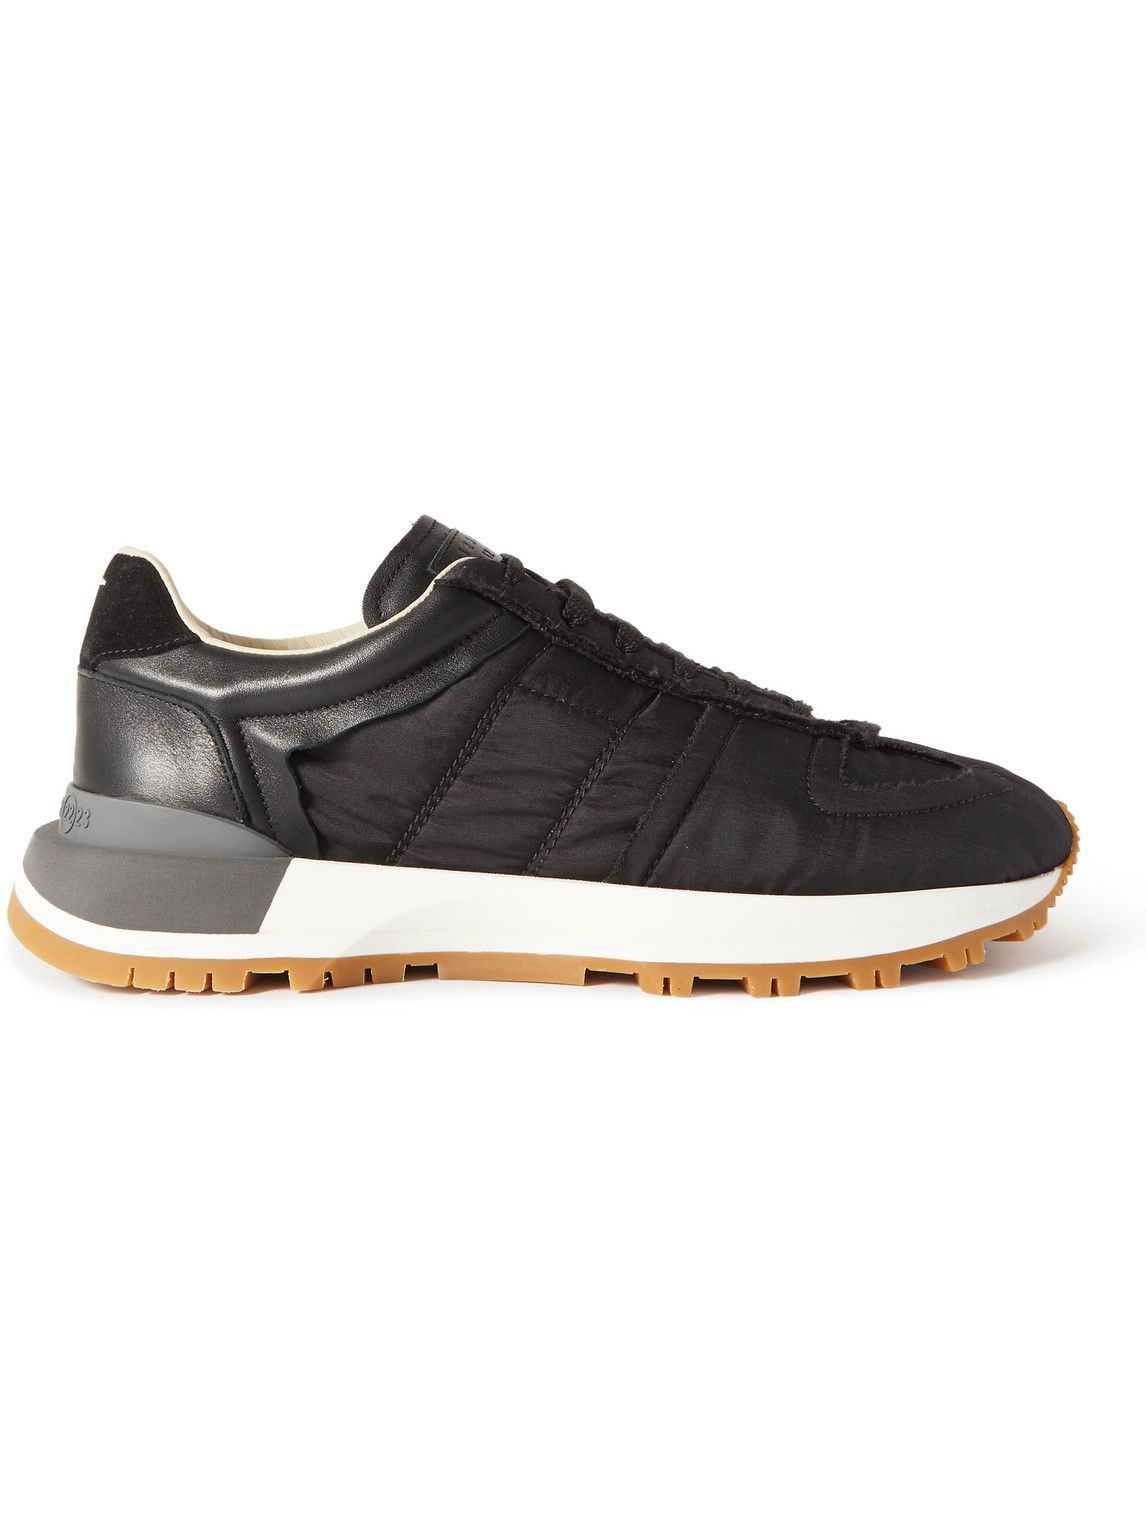 Maison Margiela - Runner Leather and Suede-Trimmed Nylon Sneakers ...